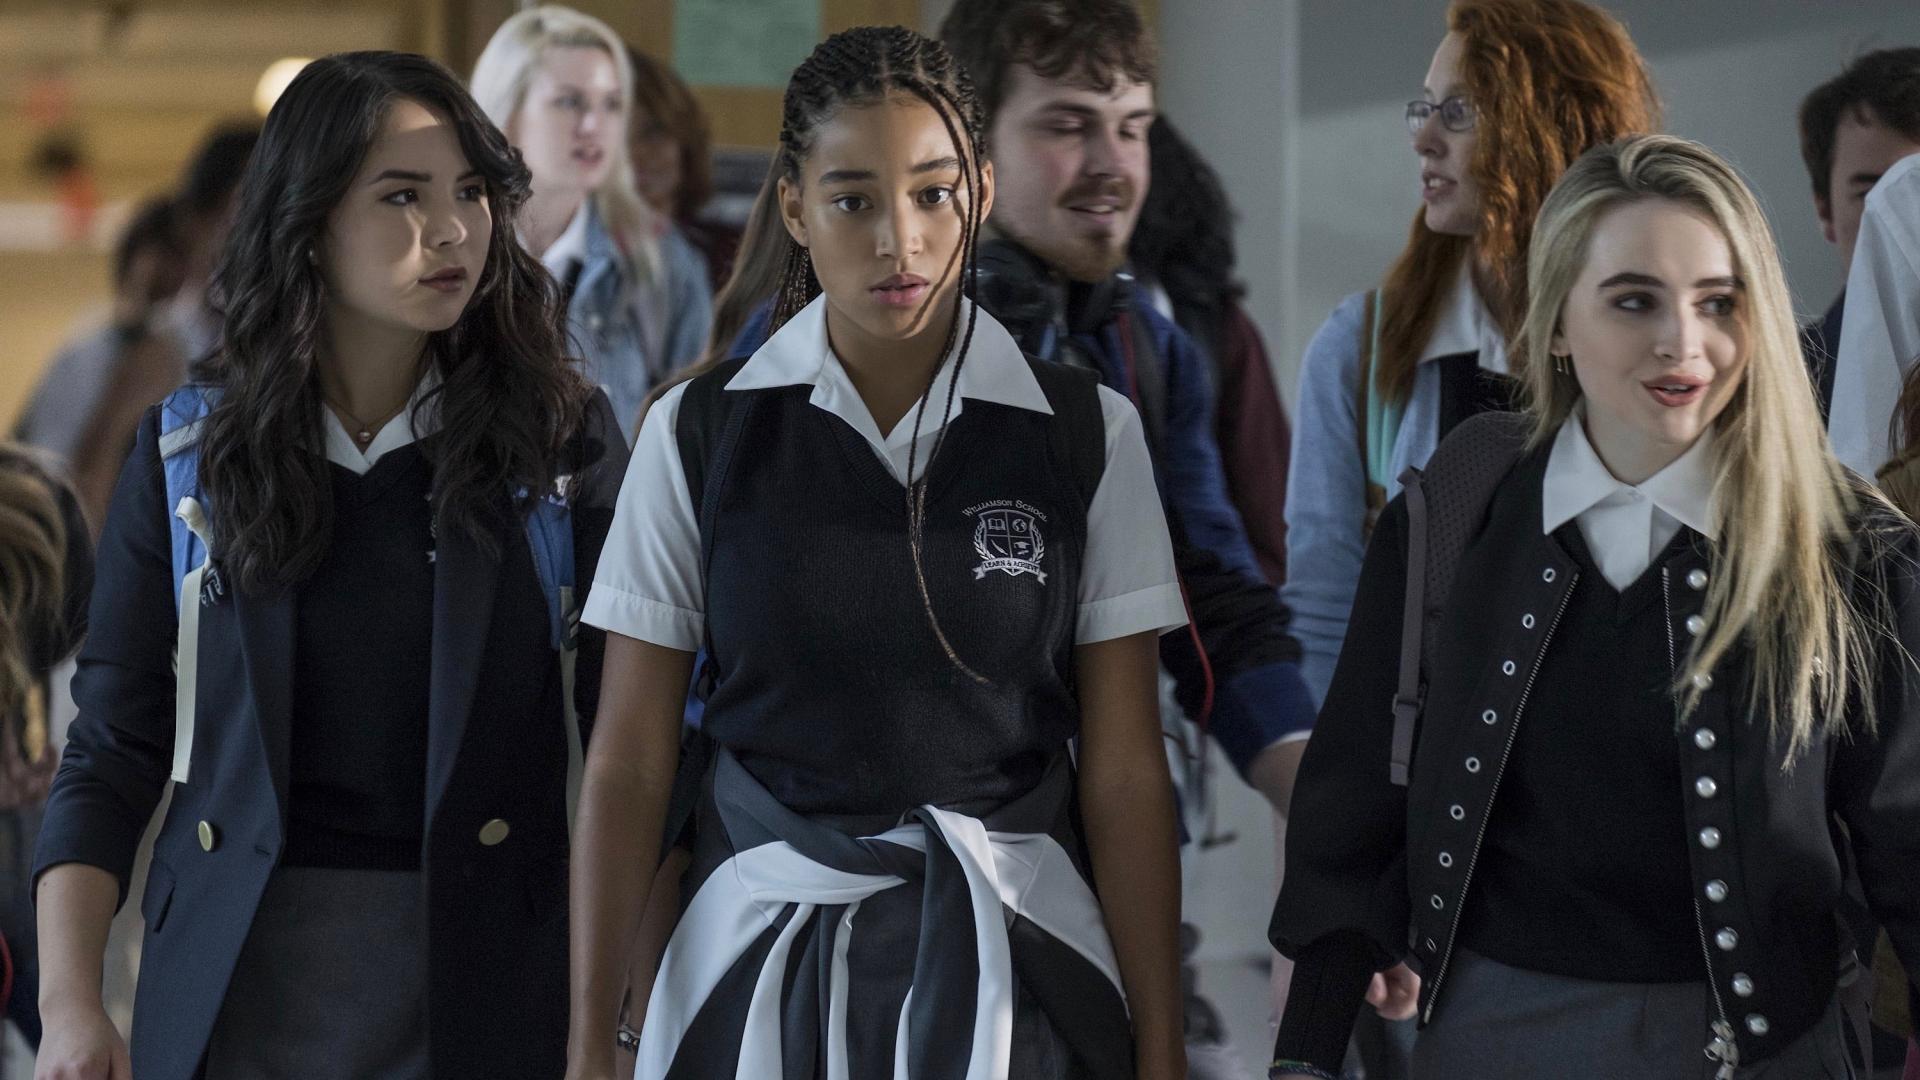 The Hate U Give (2018). FilmFed, Ratings, Reviews